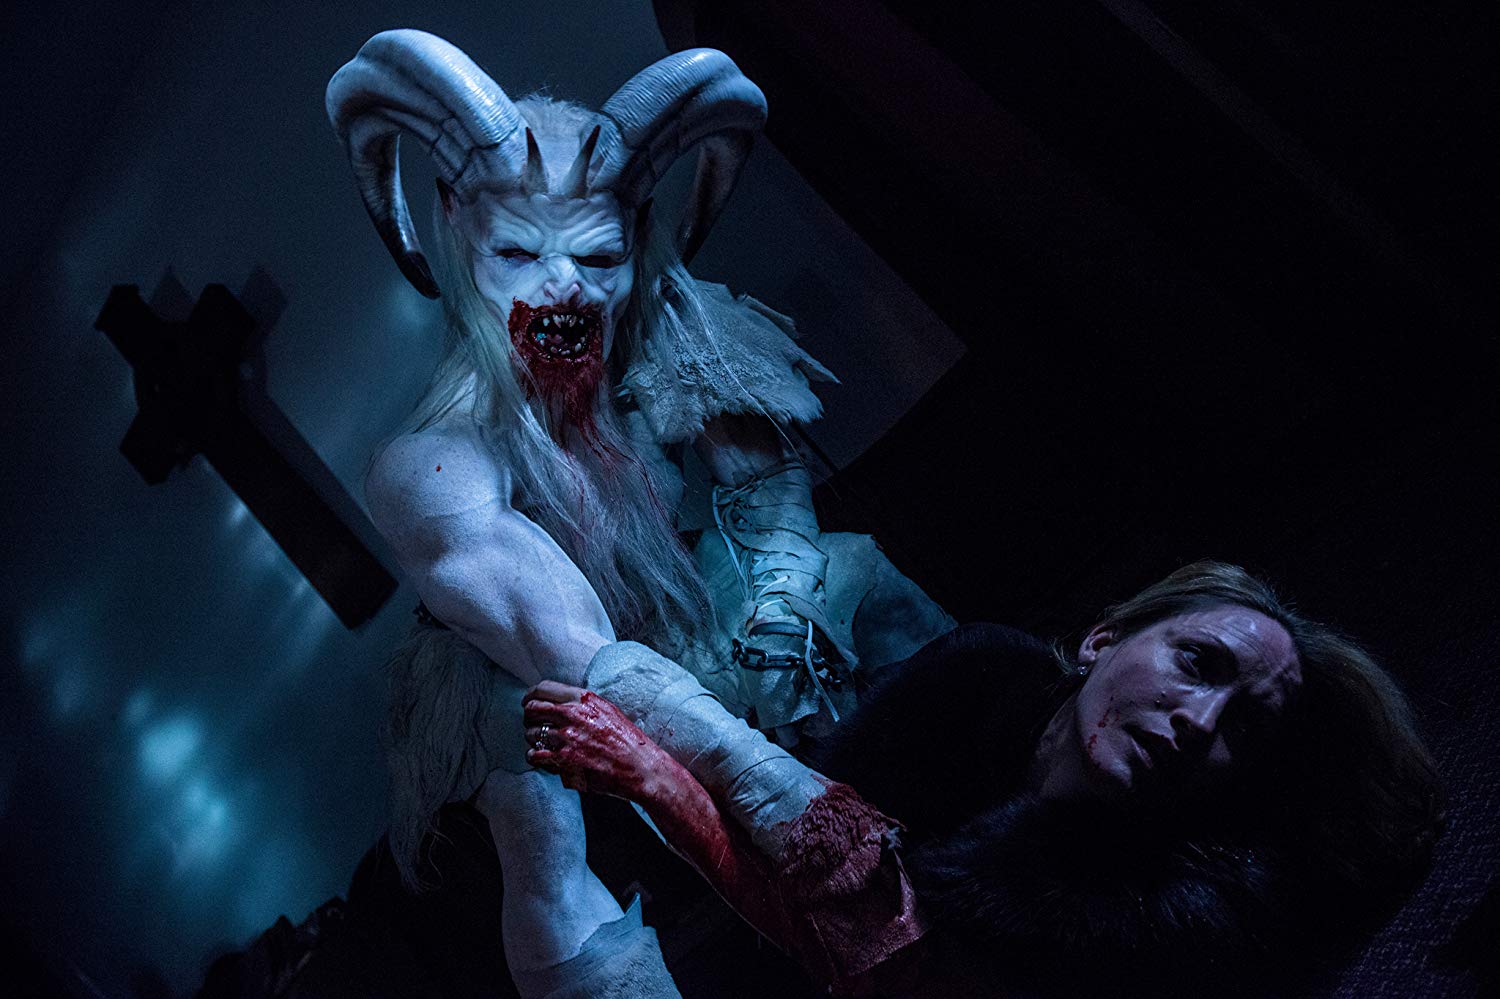 A Christmas Horror Story 2015 Watch Online on 123Movies!